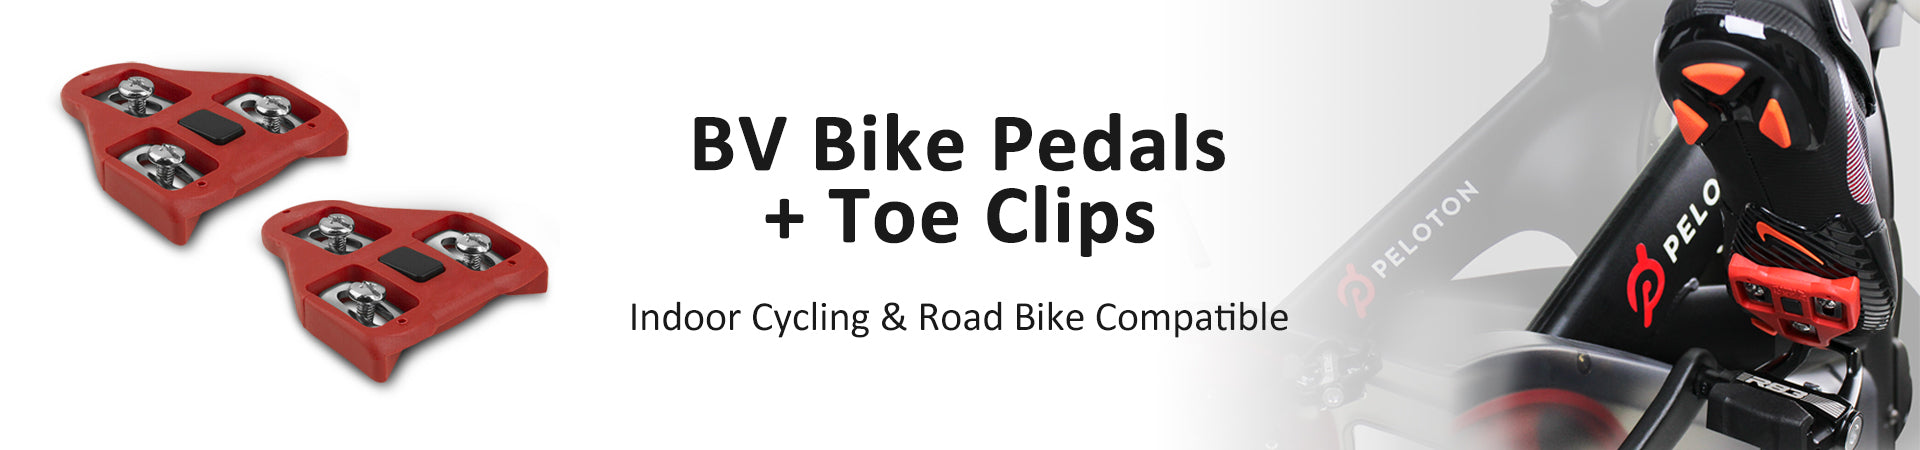 BV Bike Pedals and Toe Clips